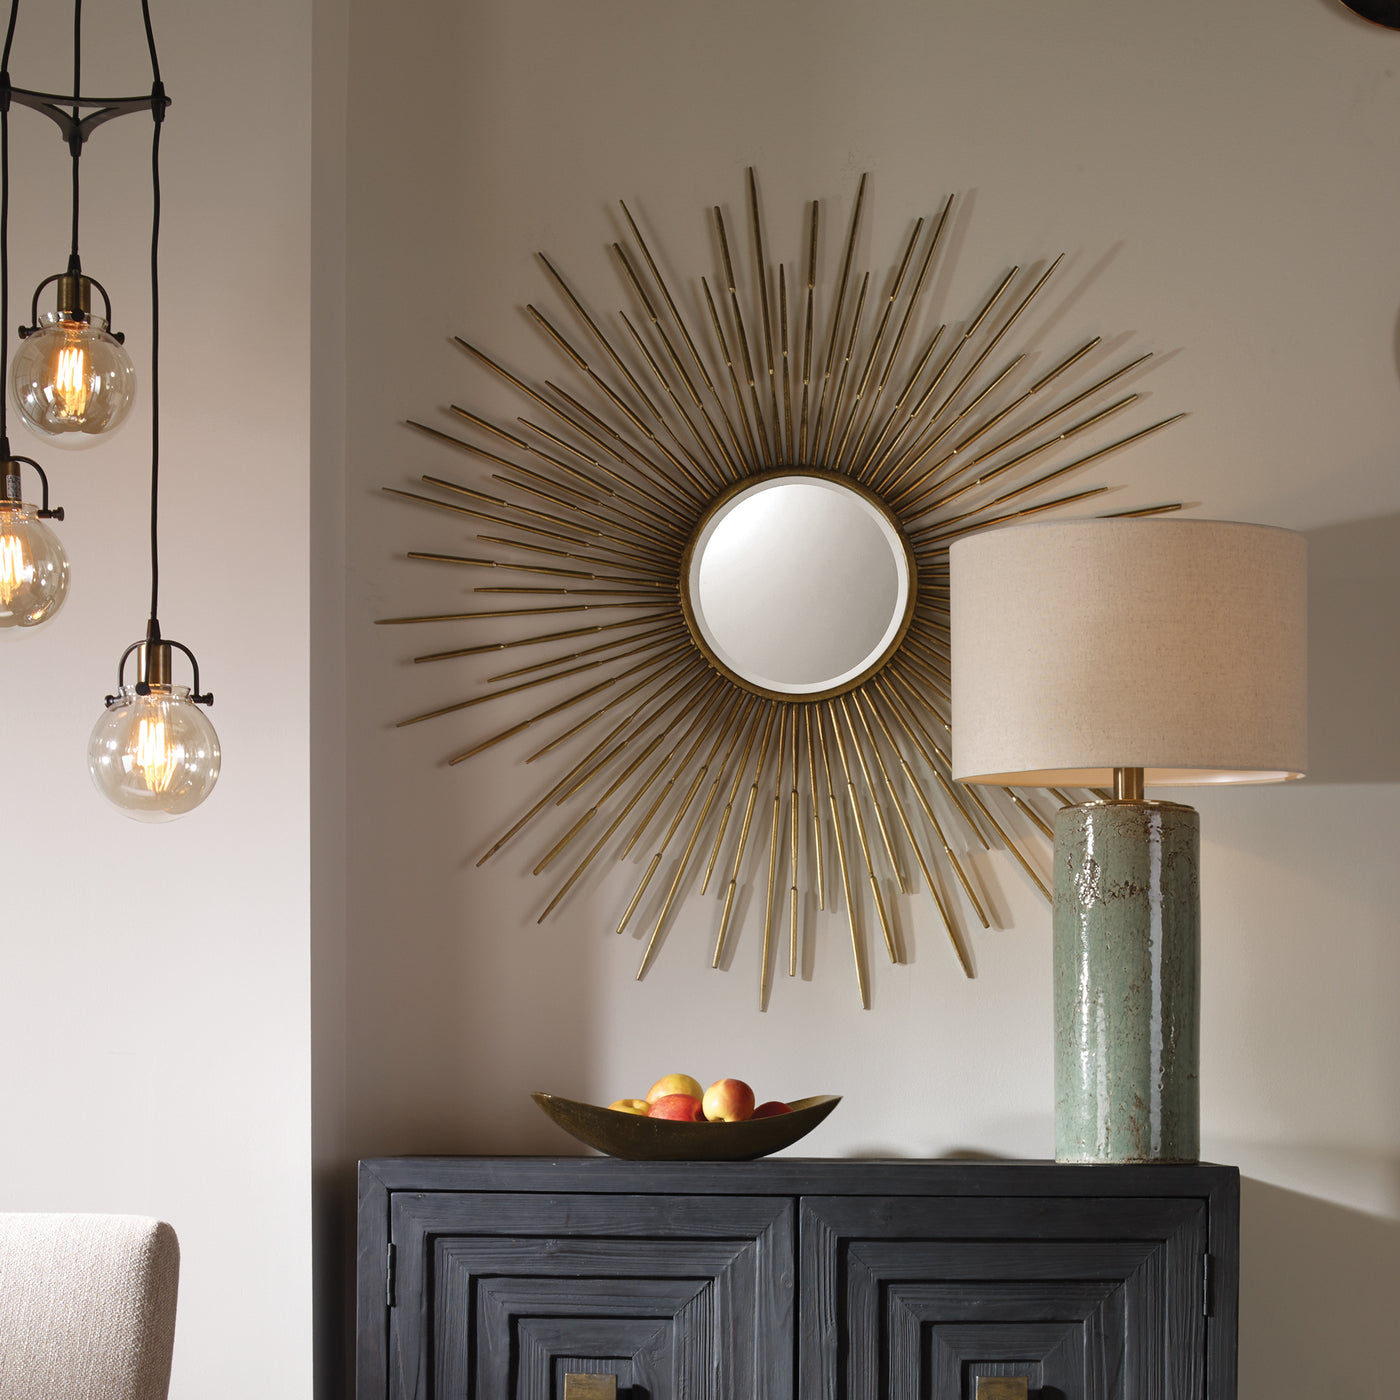 Inspired By Mid-century Designs, This Starburst Mirror Is Finished In An Antiqued Gold Leaf And Features A 1" Bevel.